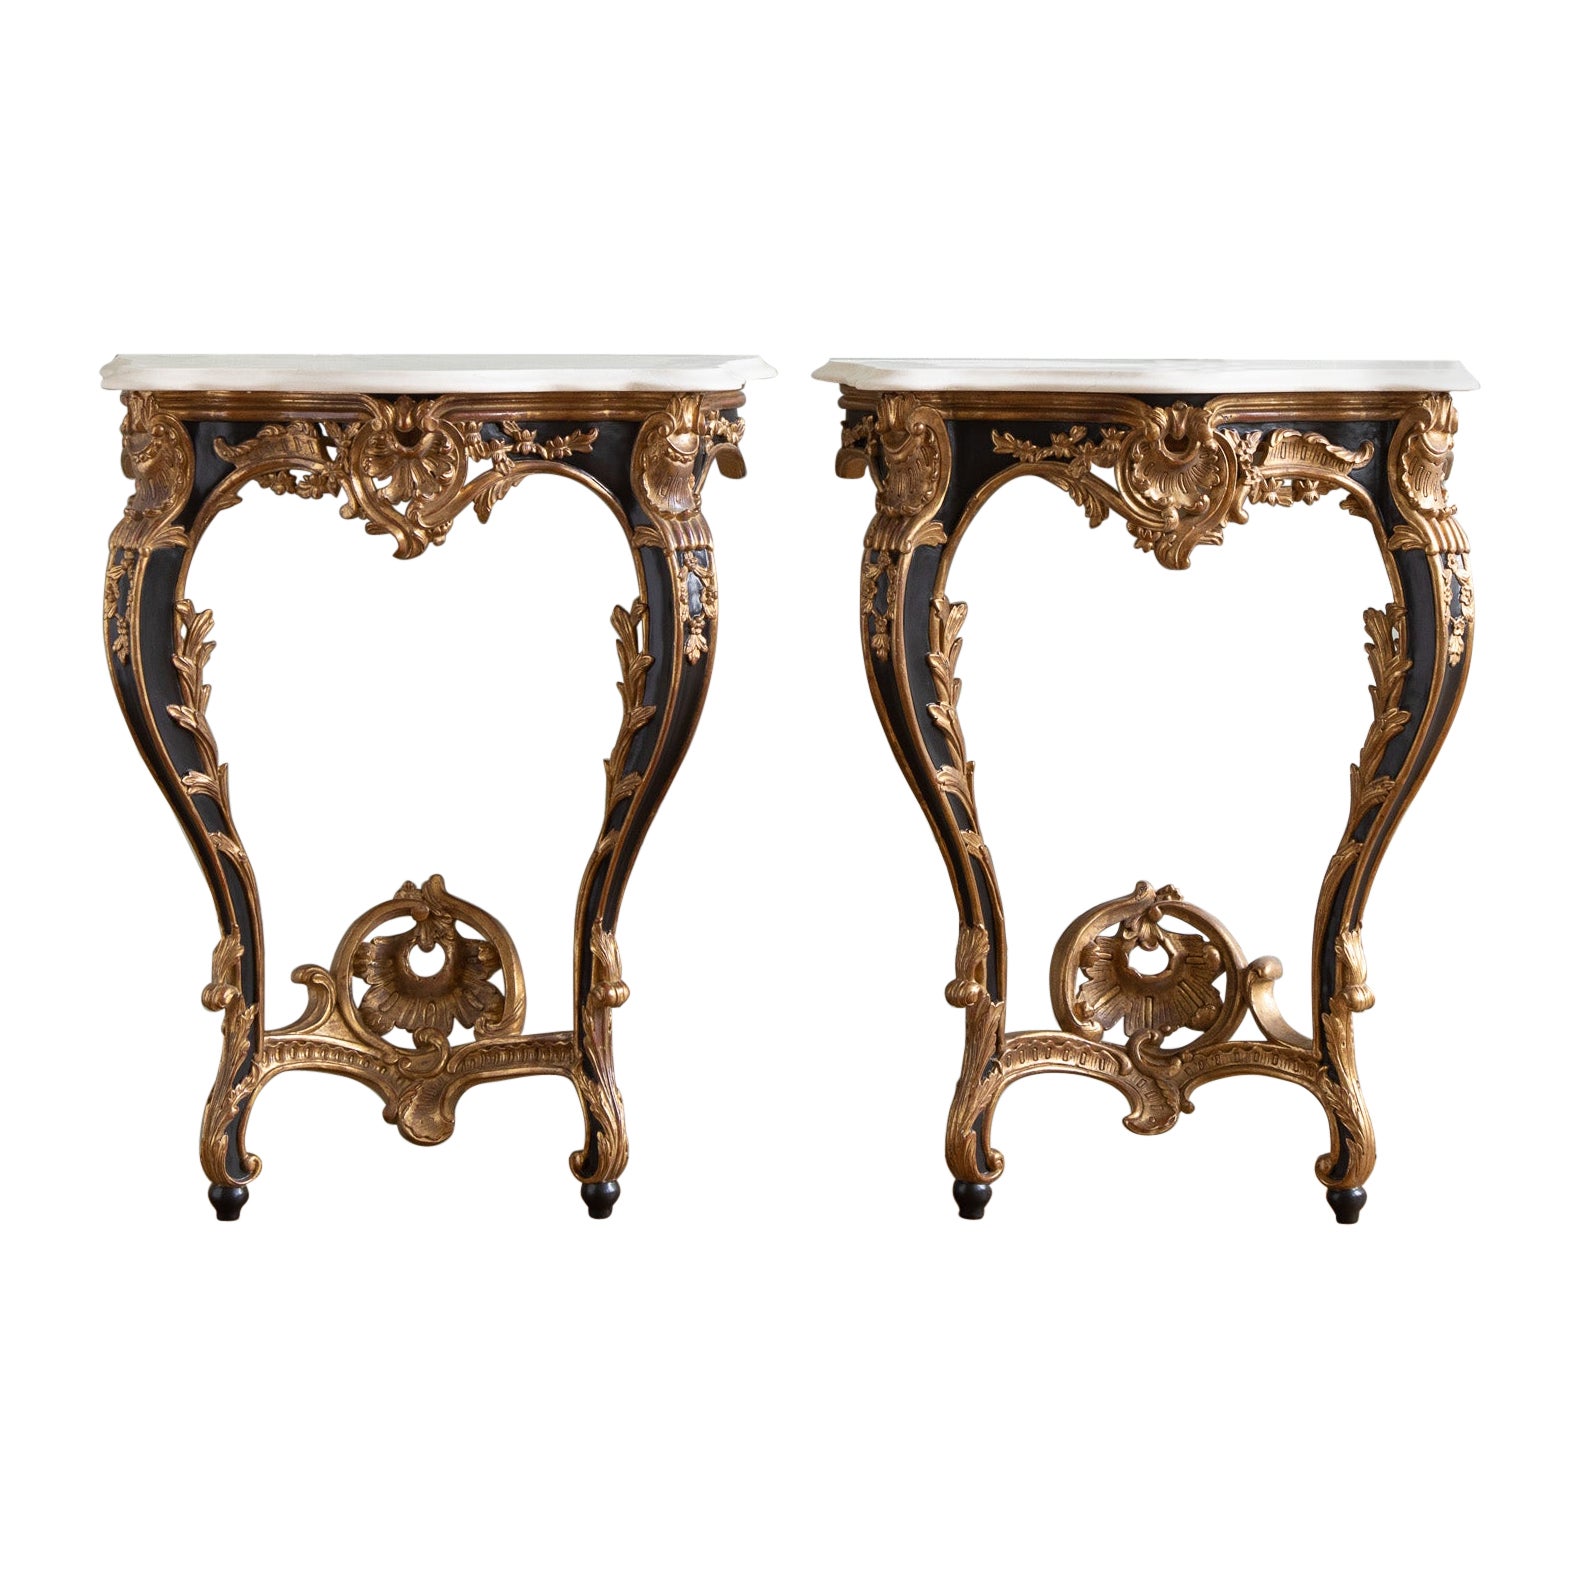 Pair of Hand Carved Louis XV French Style Gilt Wood Consoles